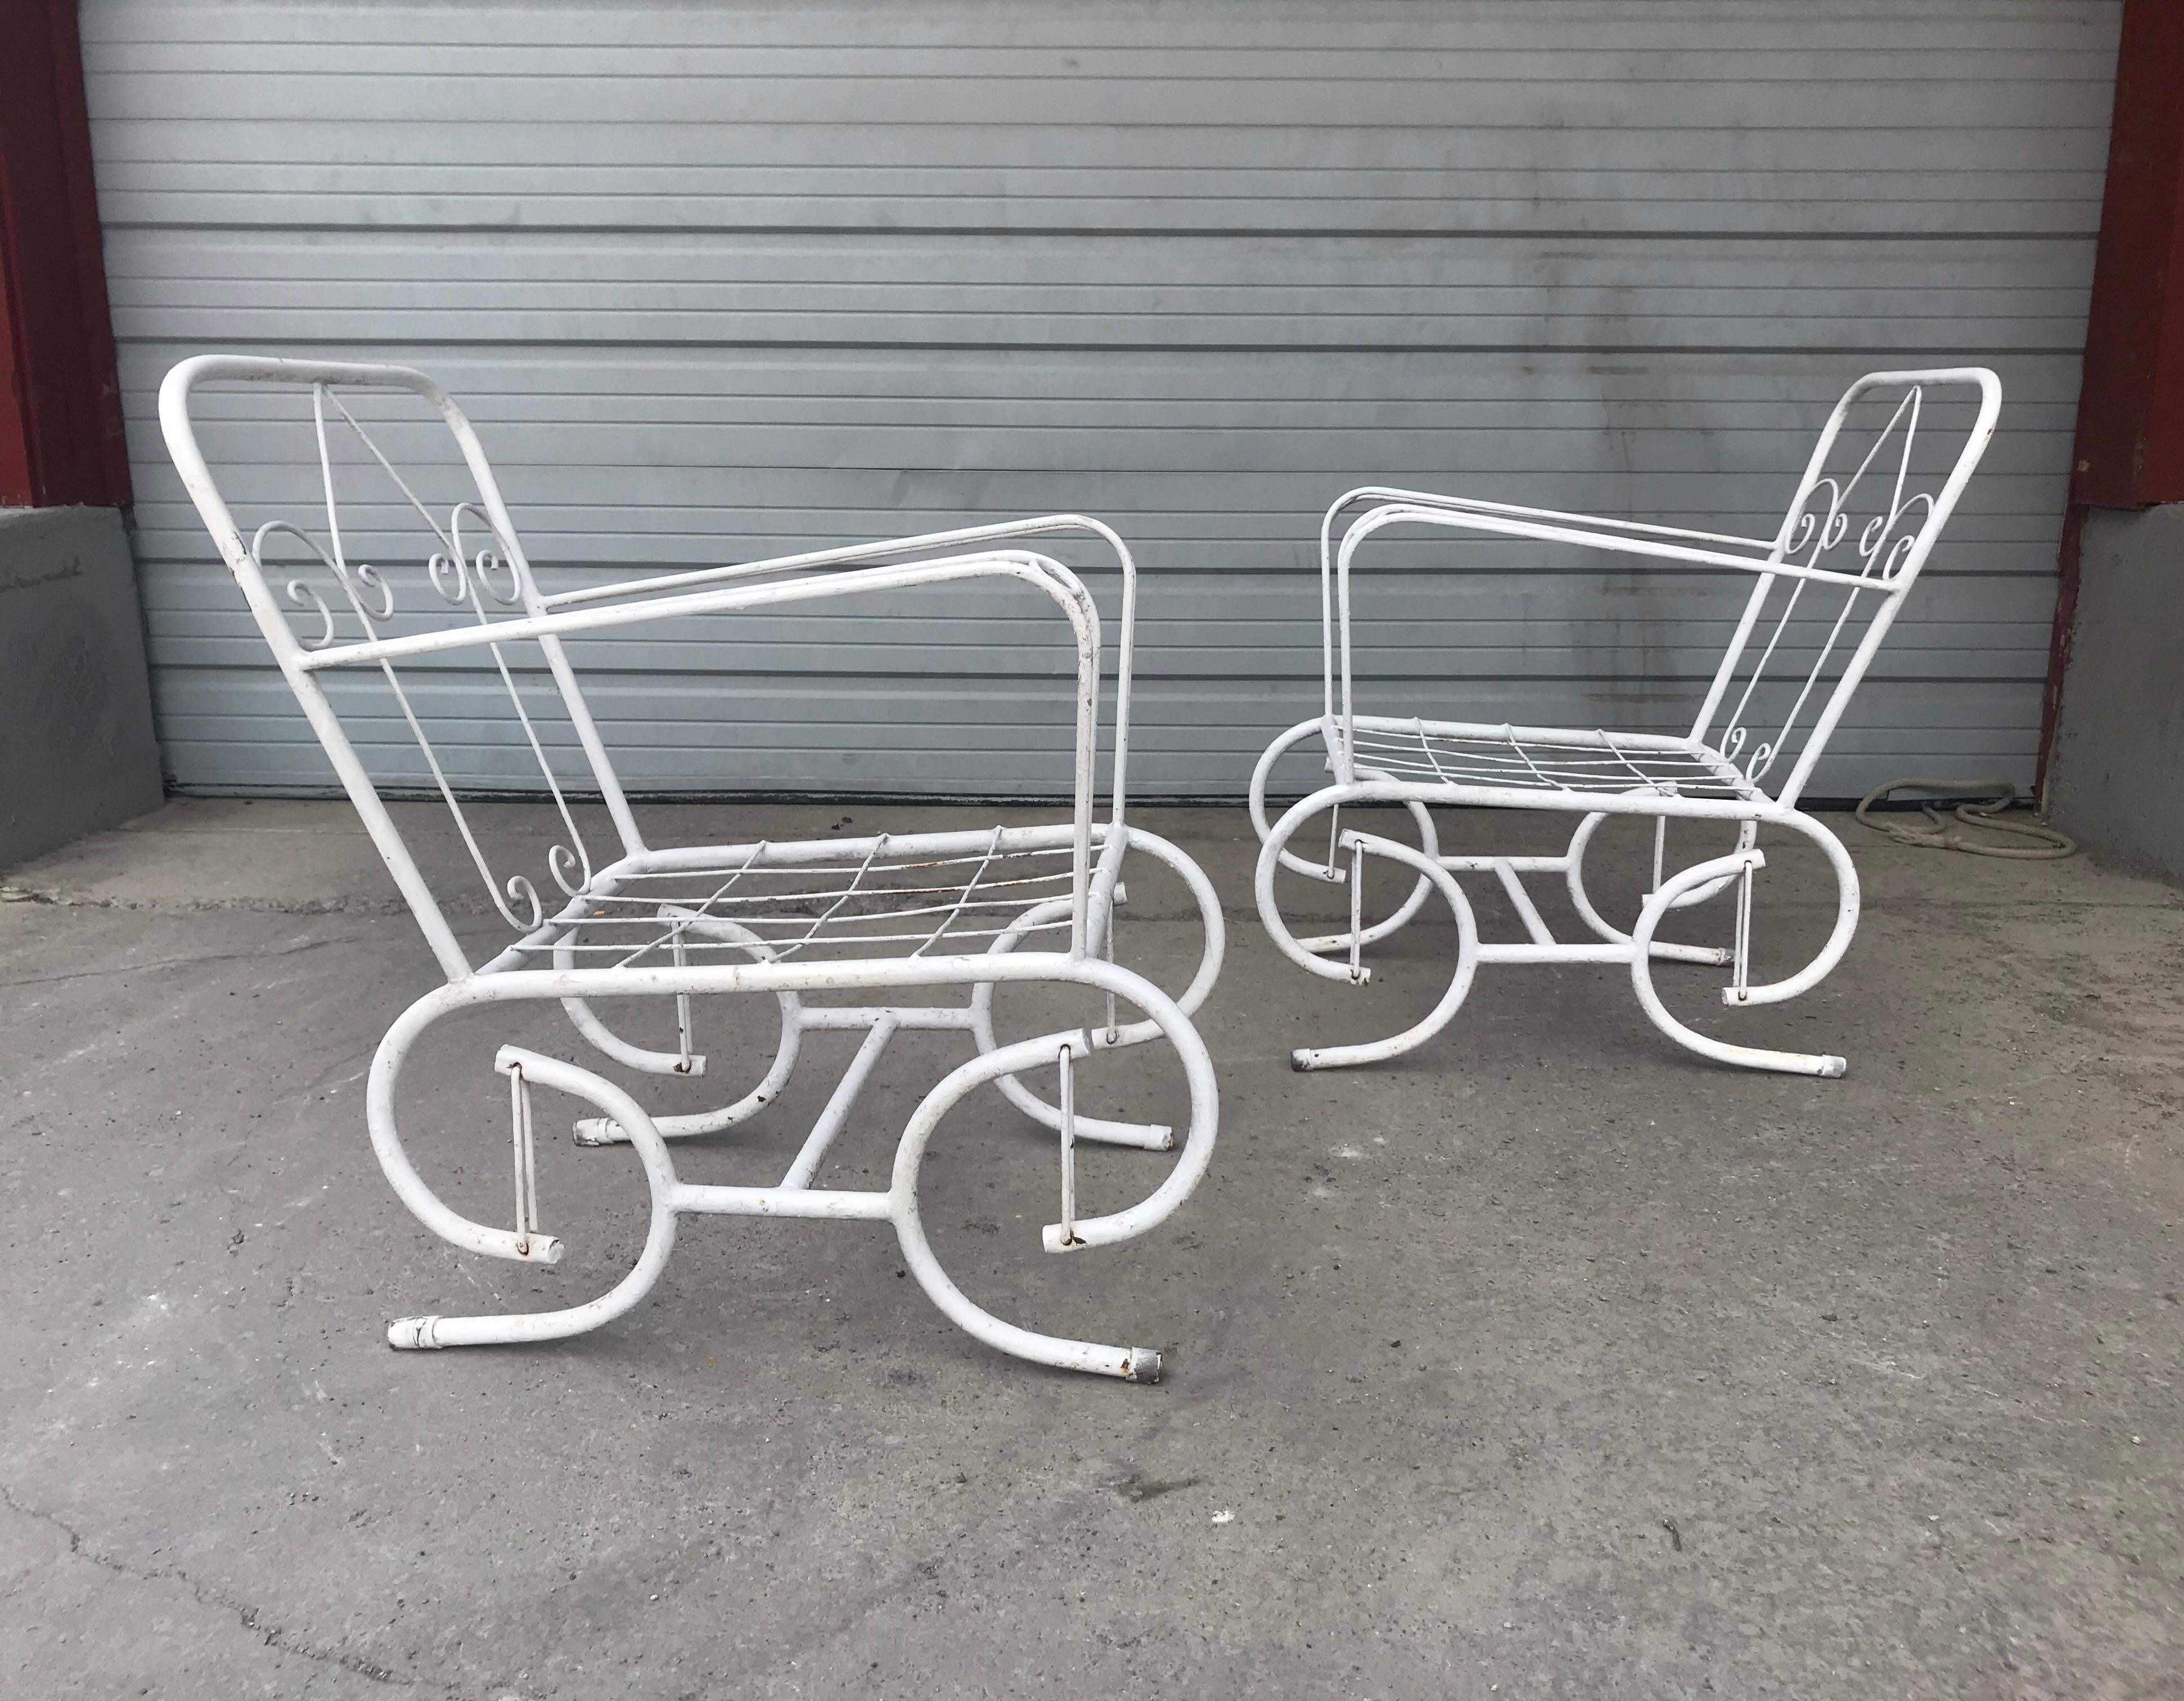 Pair of stylized outdoor metal glider chairs. Nice quality and construction. Unusual modernist design. Hand delivery avail to New York City or anywhere en route from Buffalo NY.